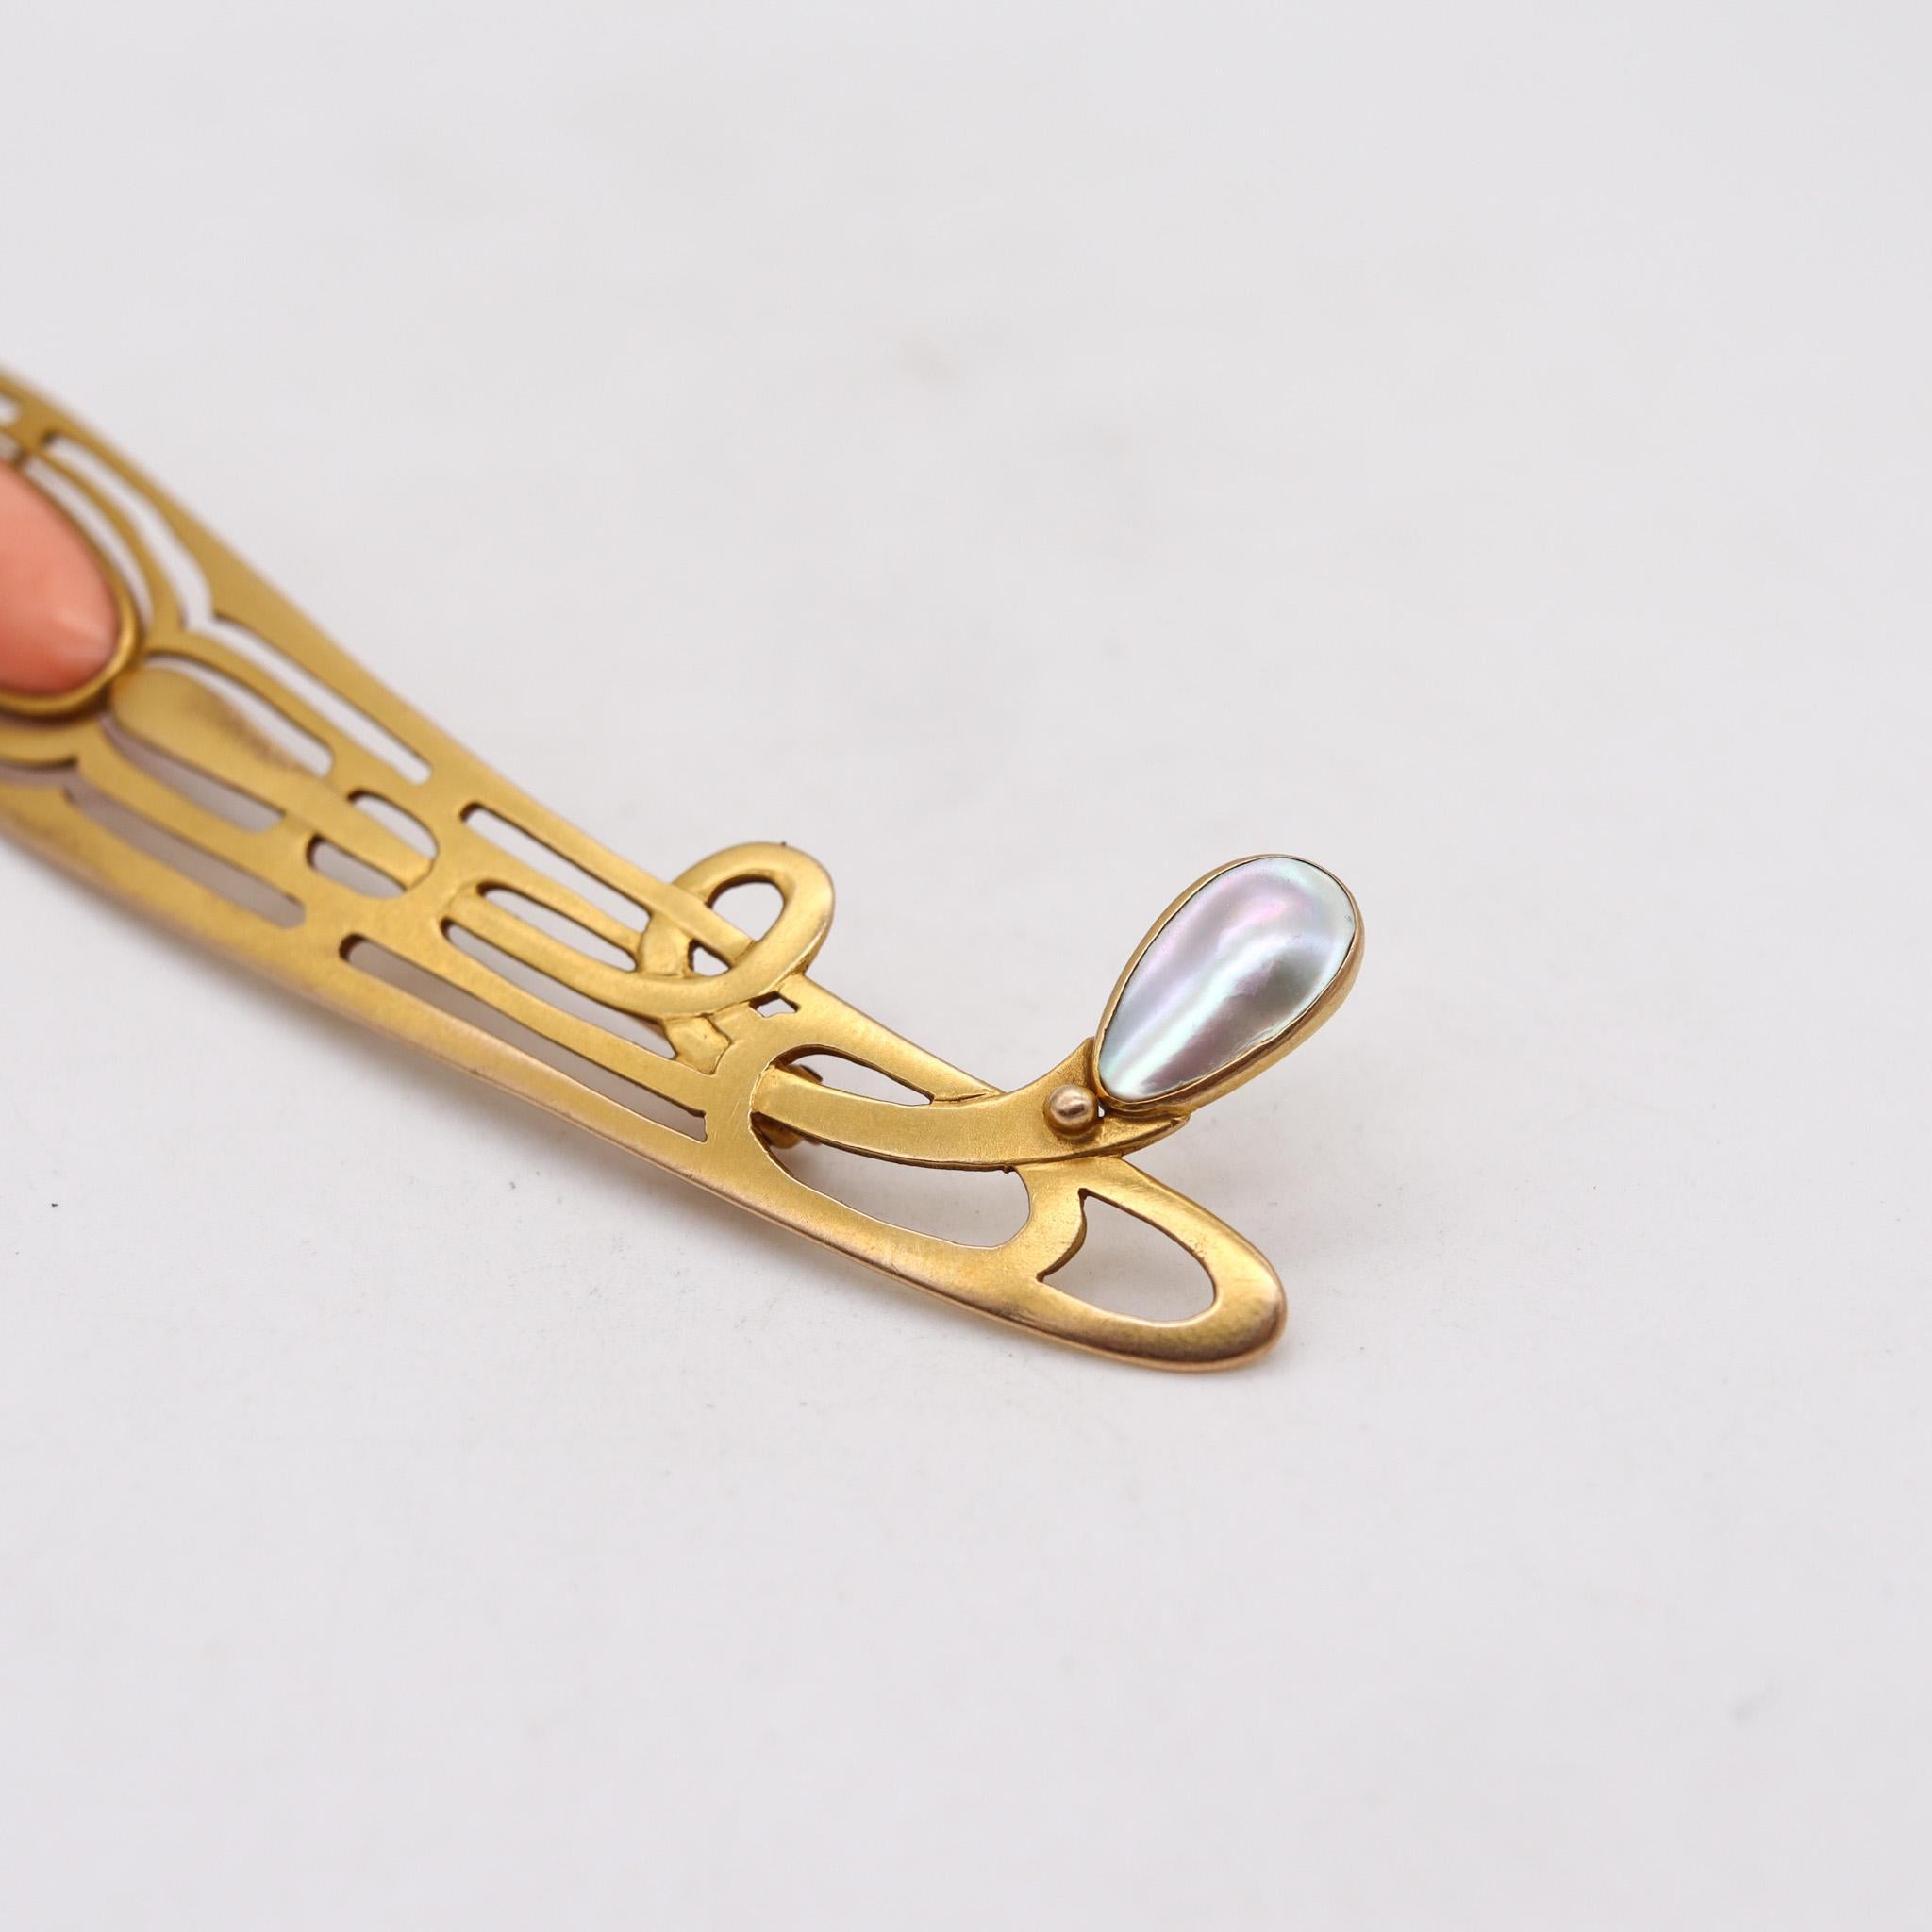 Jugendstil brooch made in Austria.

An exceptional piece of Jugendstil art, created in Austria or Germany back in the 1900. Crafted during the Art Nouveau period, with curvilinear organic patterns in solid yellow gold of 14 karats and fitted with a